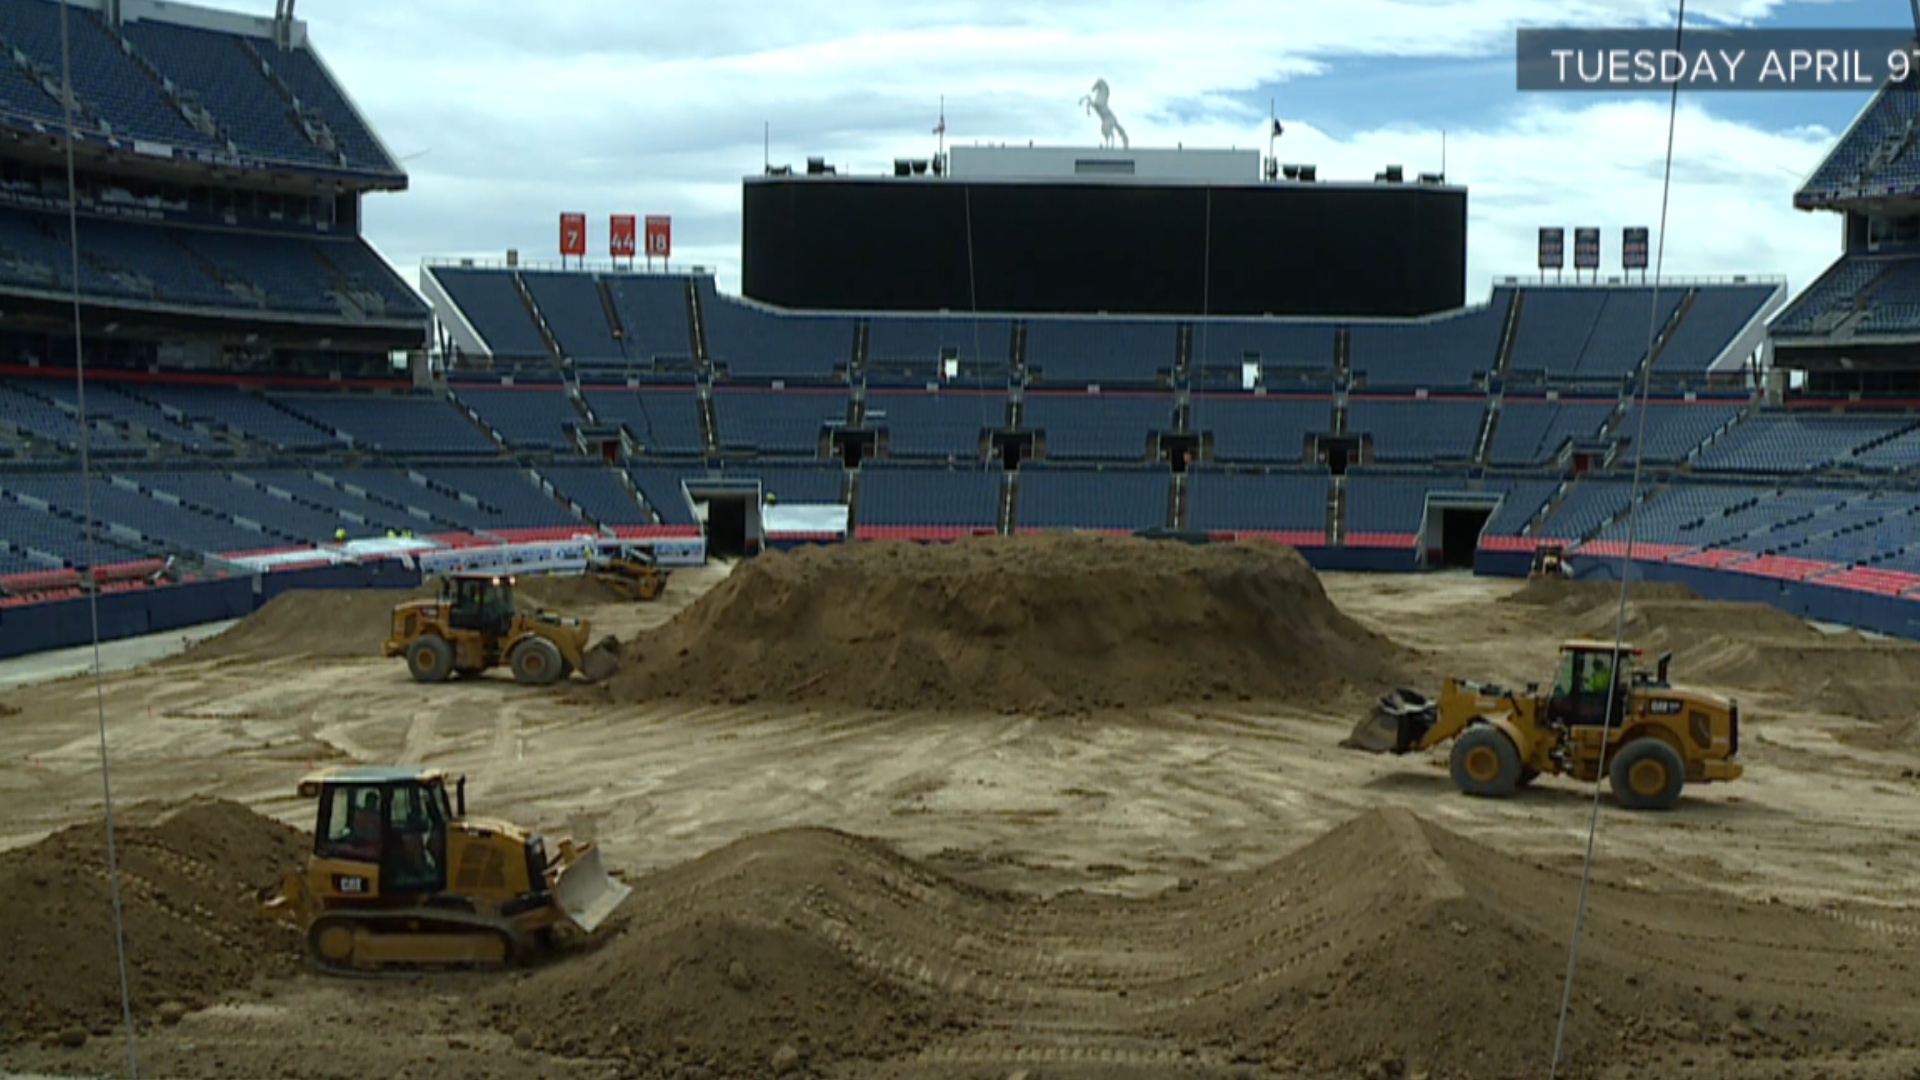 Monster Energy Supercross world championship coming to Broncos Stadium at Mile High in Denver 9news